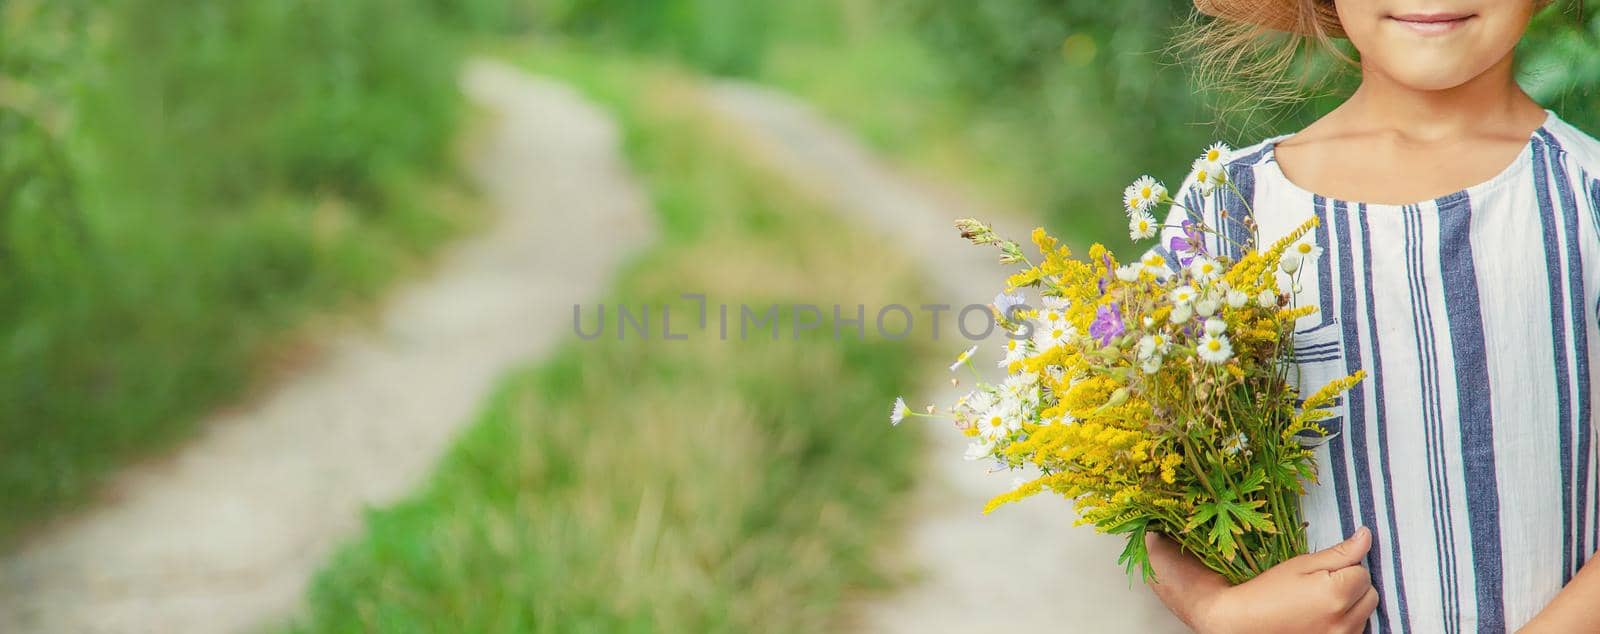 girl holding wildflowers in the hands of a child. Selective focus. nature.